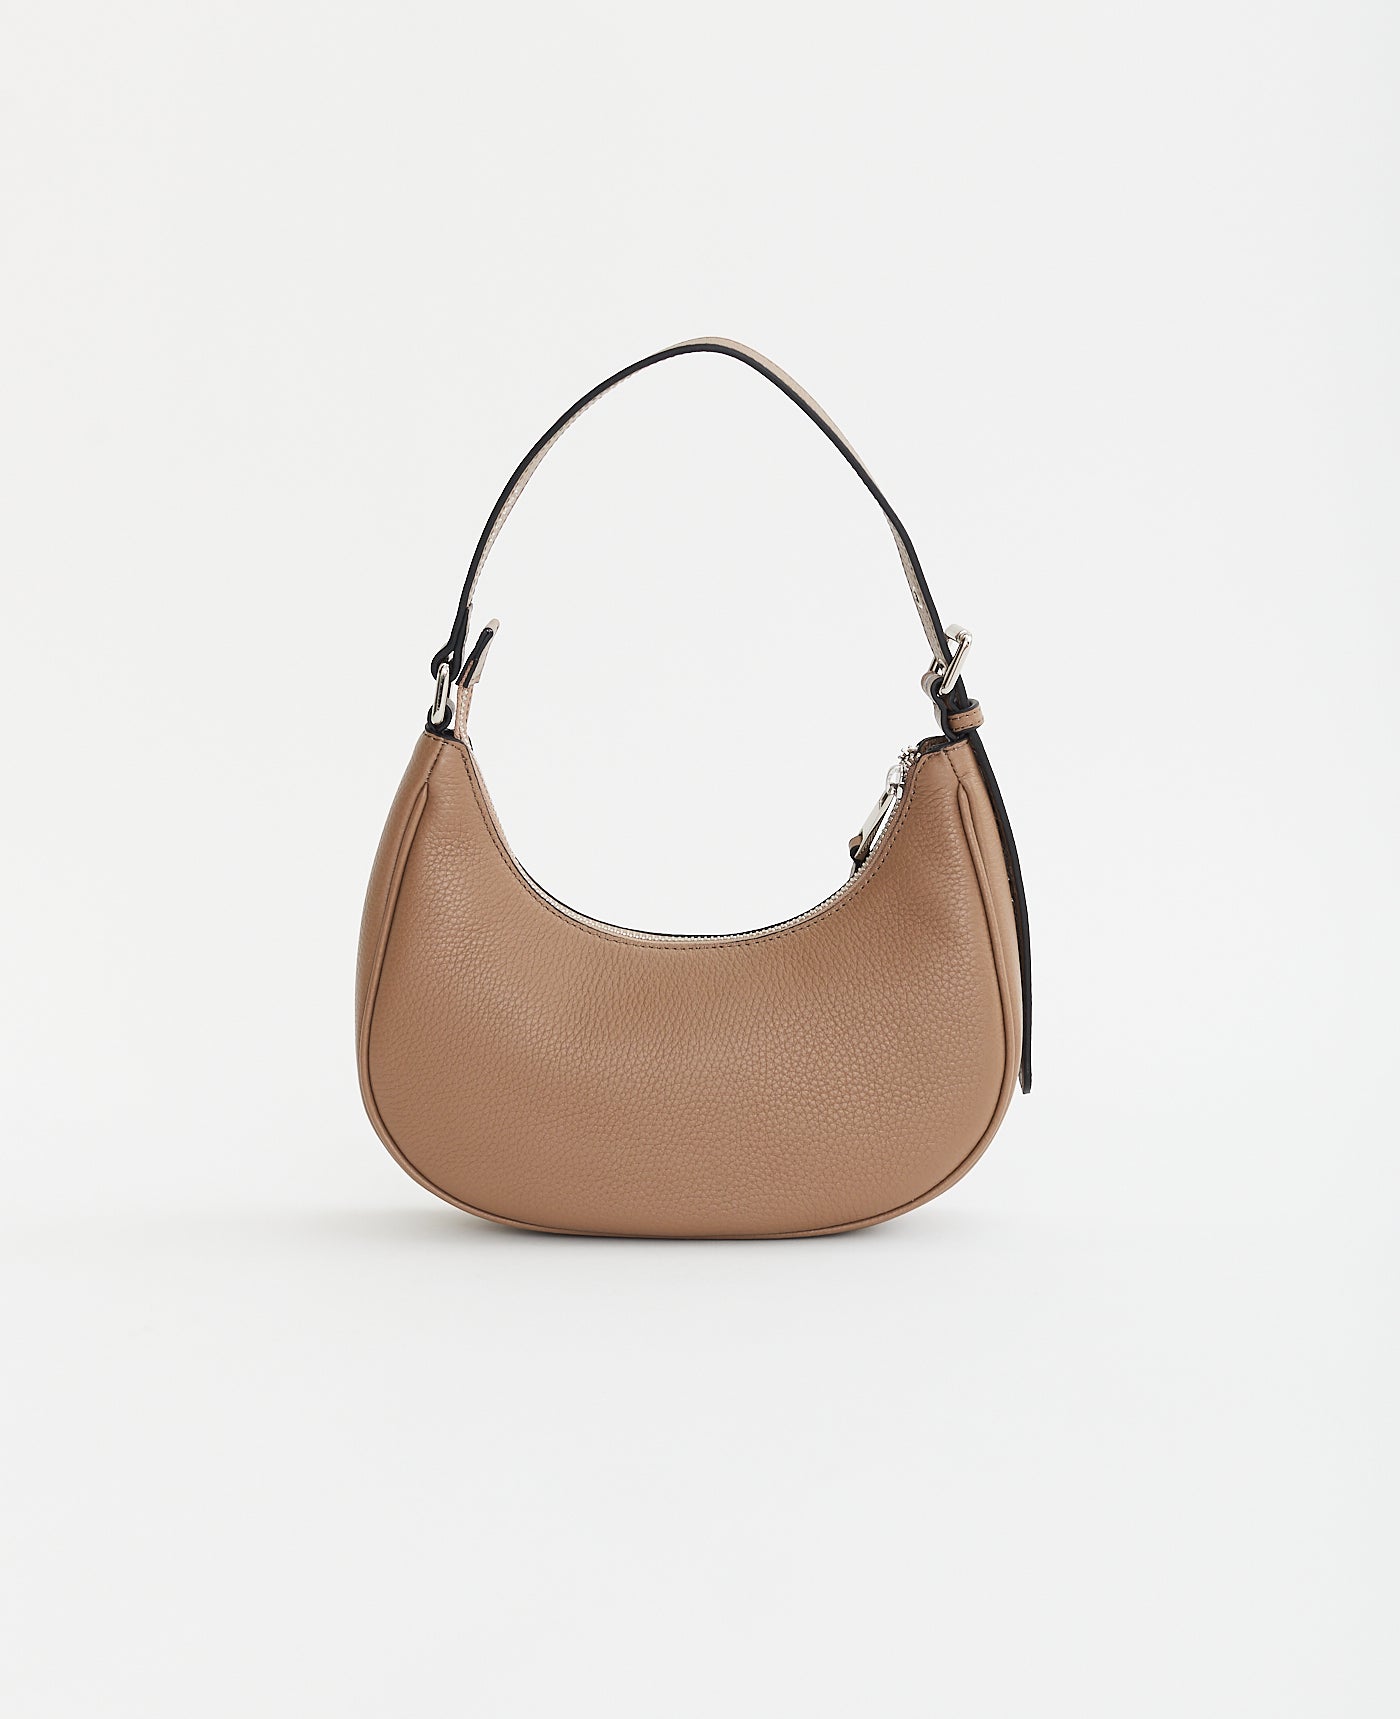 Friday Bag: Taupe Pebbled Leather